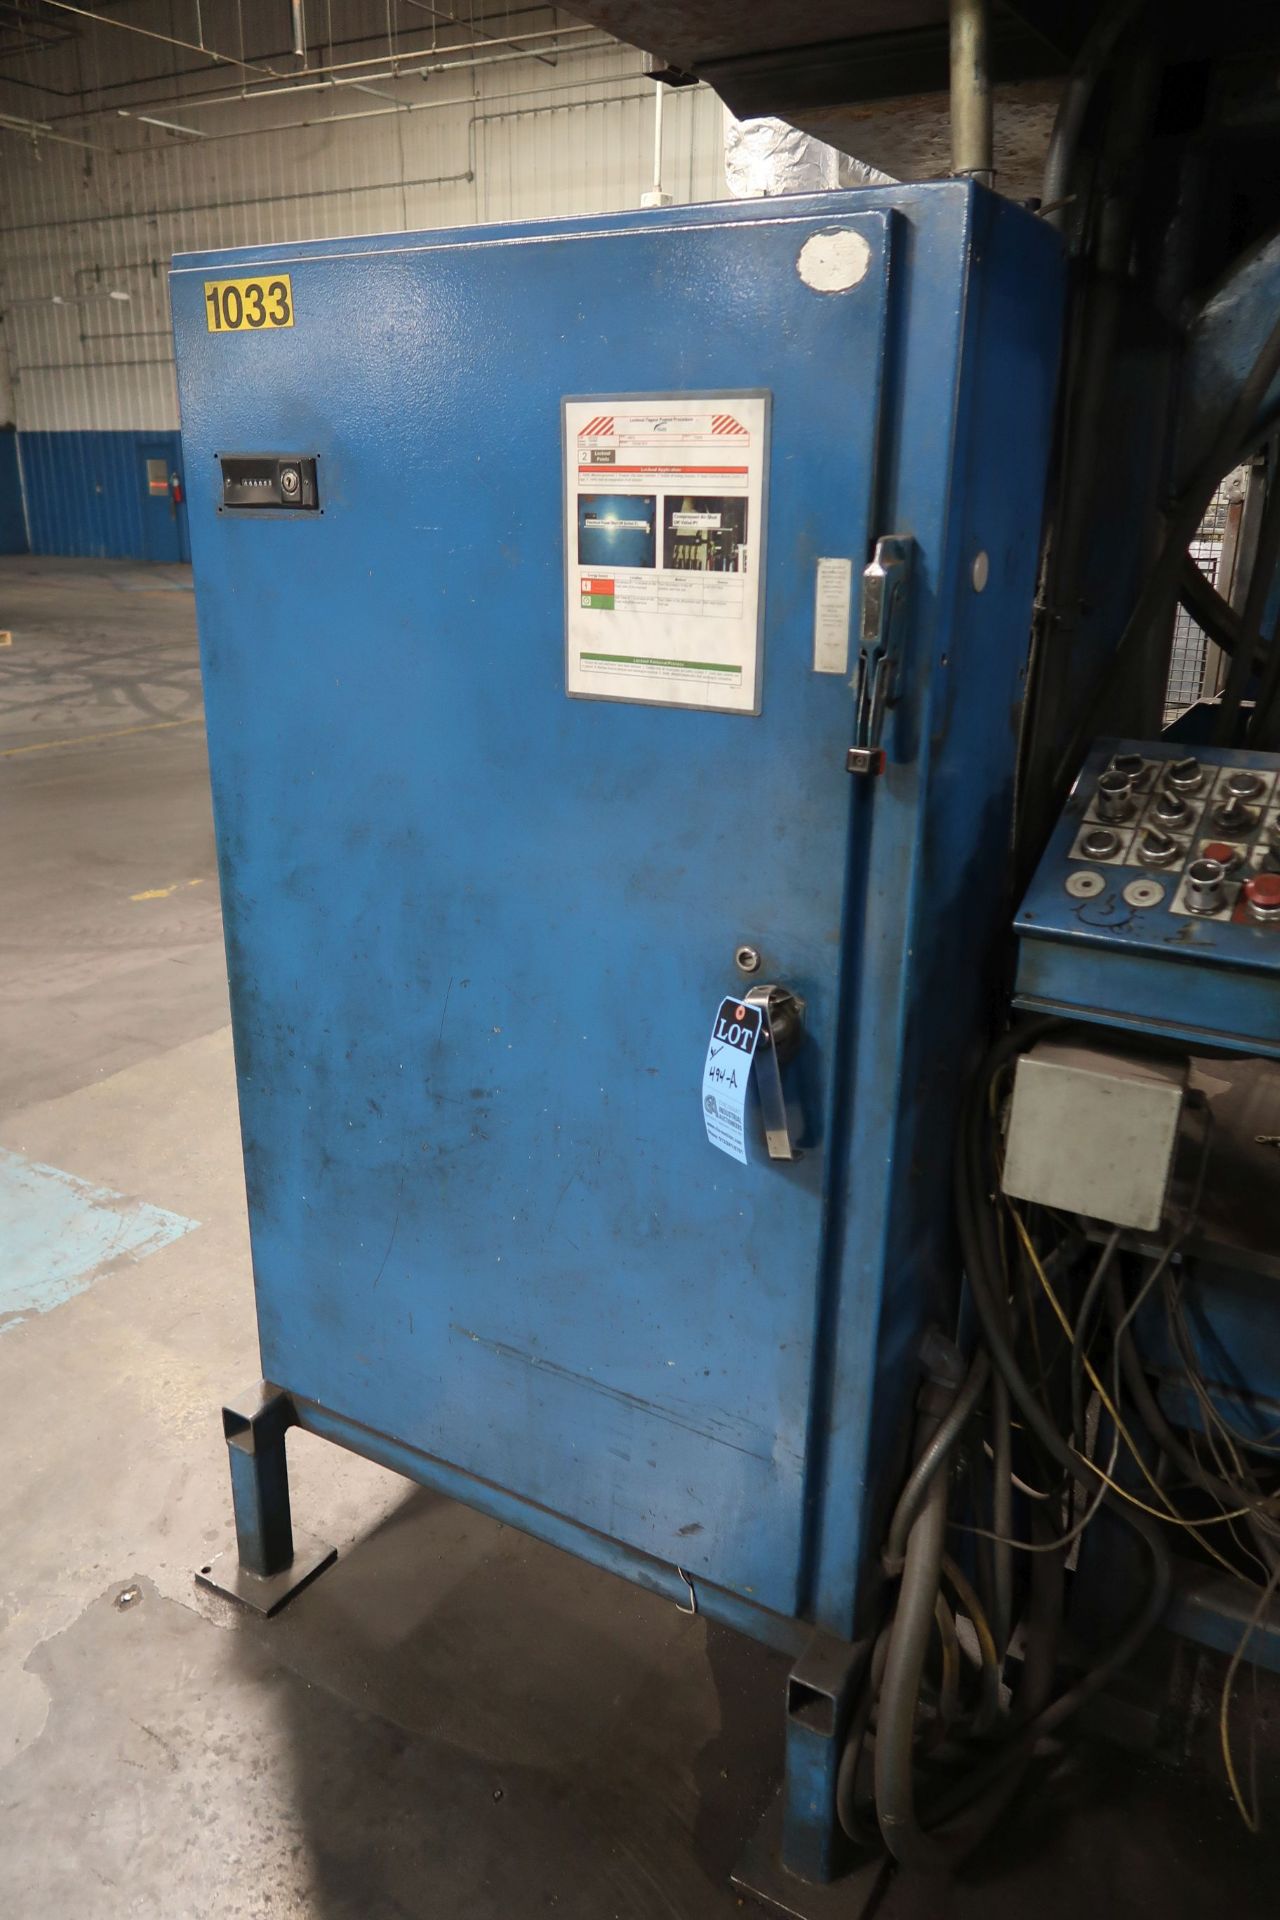 SHOP FABRICATED COINING PRESS AND HYDRAULIC UNIT **LOADING PRICE DUE TO ERRA - $2,800.00** - Image 10 of 11